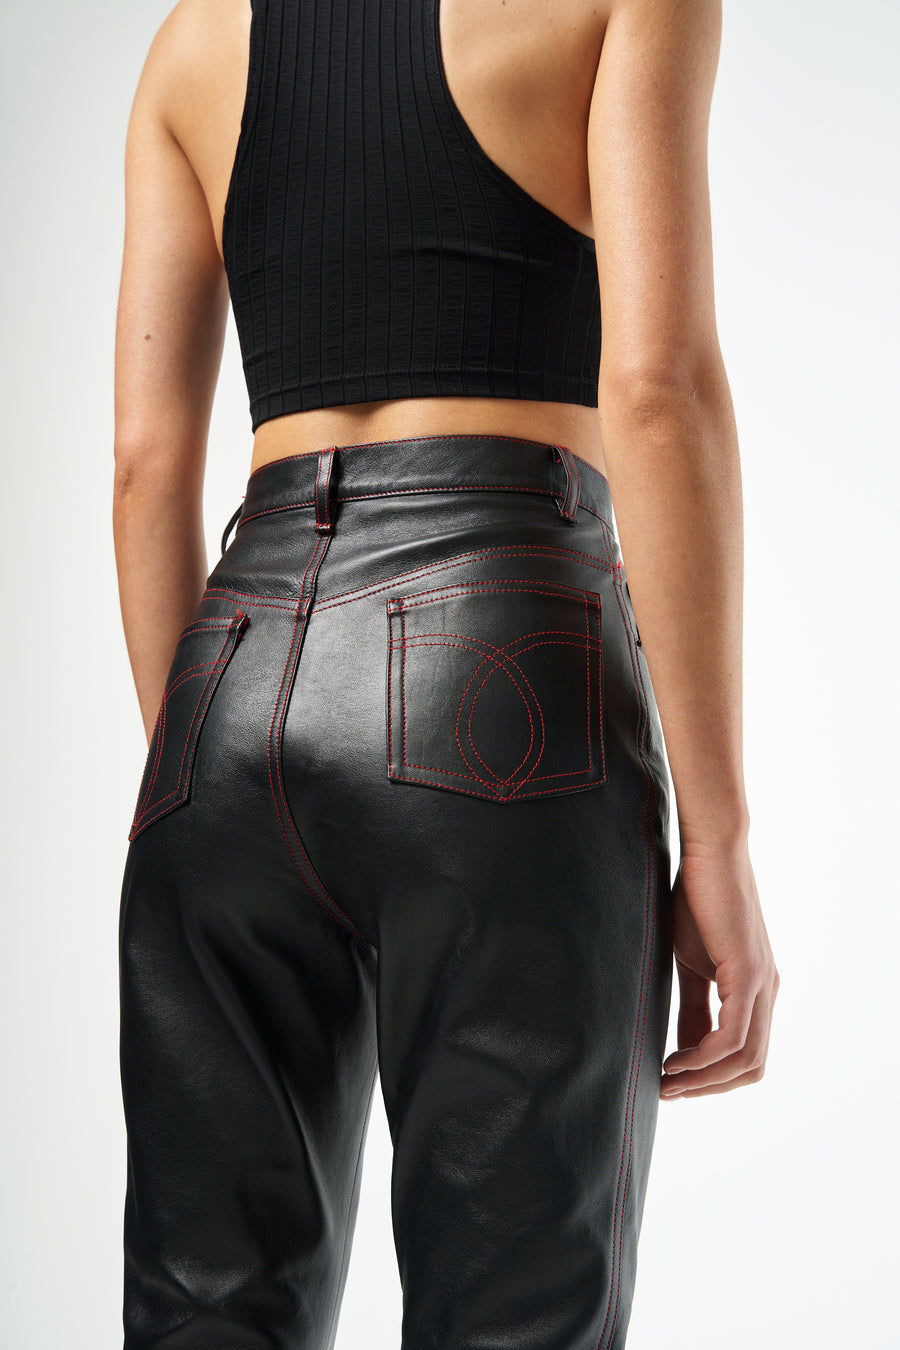 Black High Waisted Leather Trousers With Red Stitch Details 